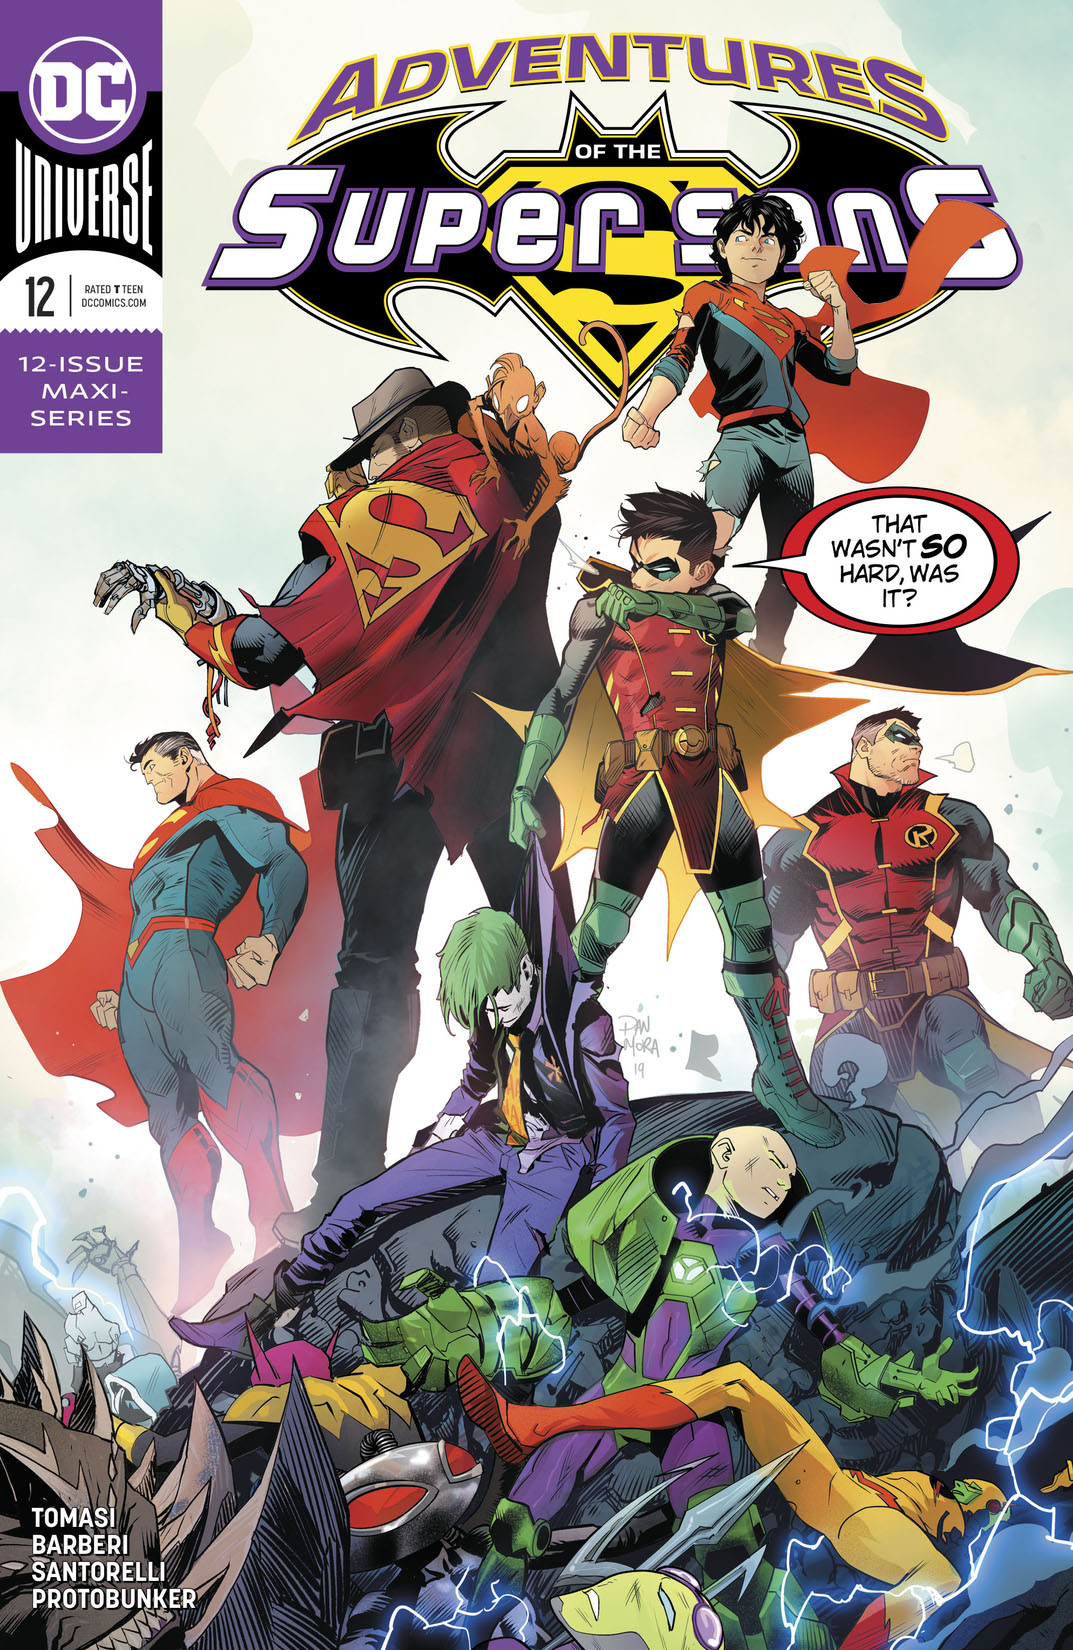 Adventures of the Super Sons #12 preview images